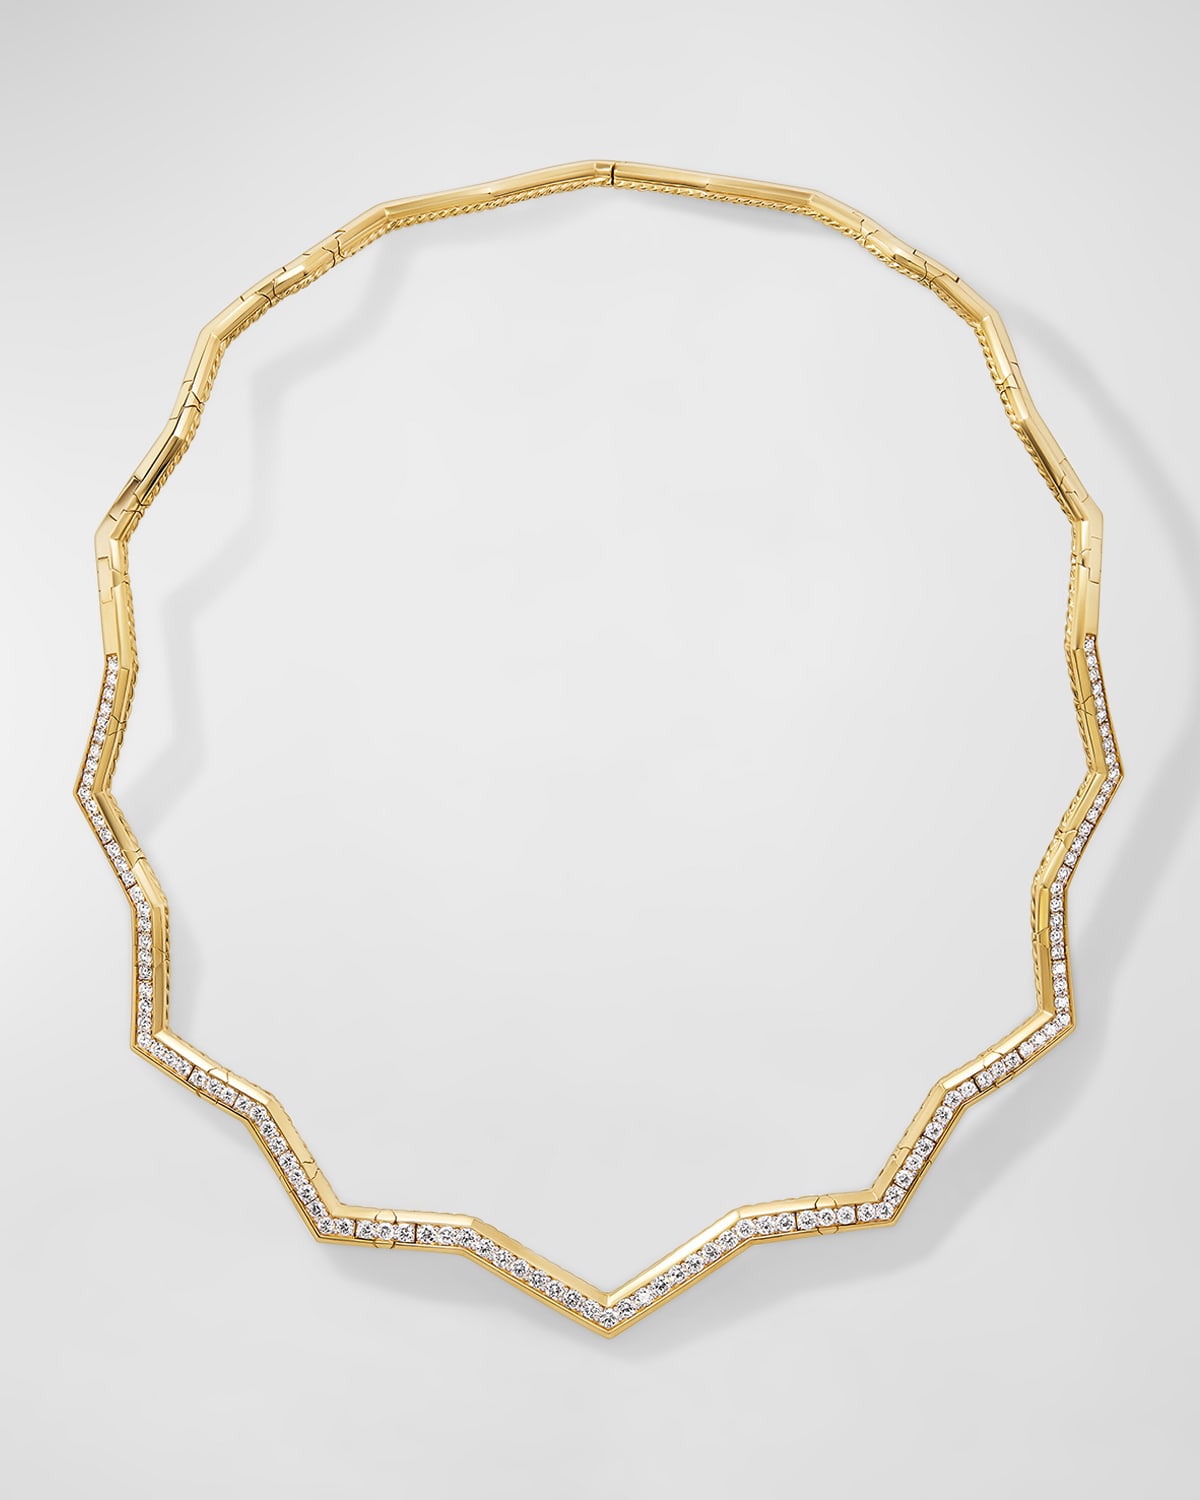 Zig Zag Stax Necklace with Diamonds in 18K Gold, 5mm